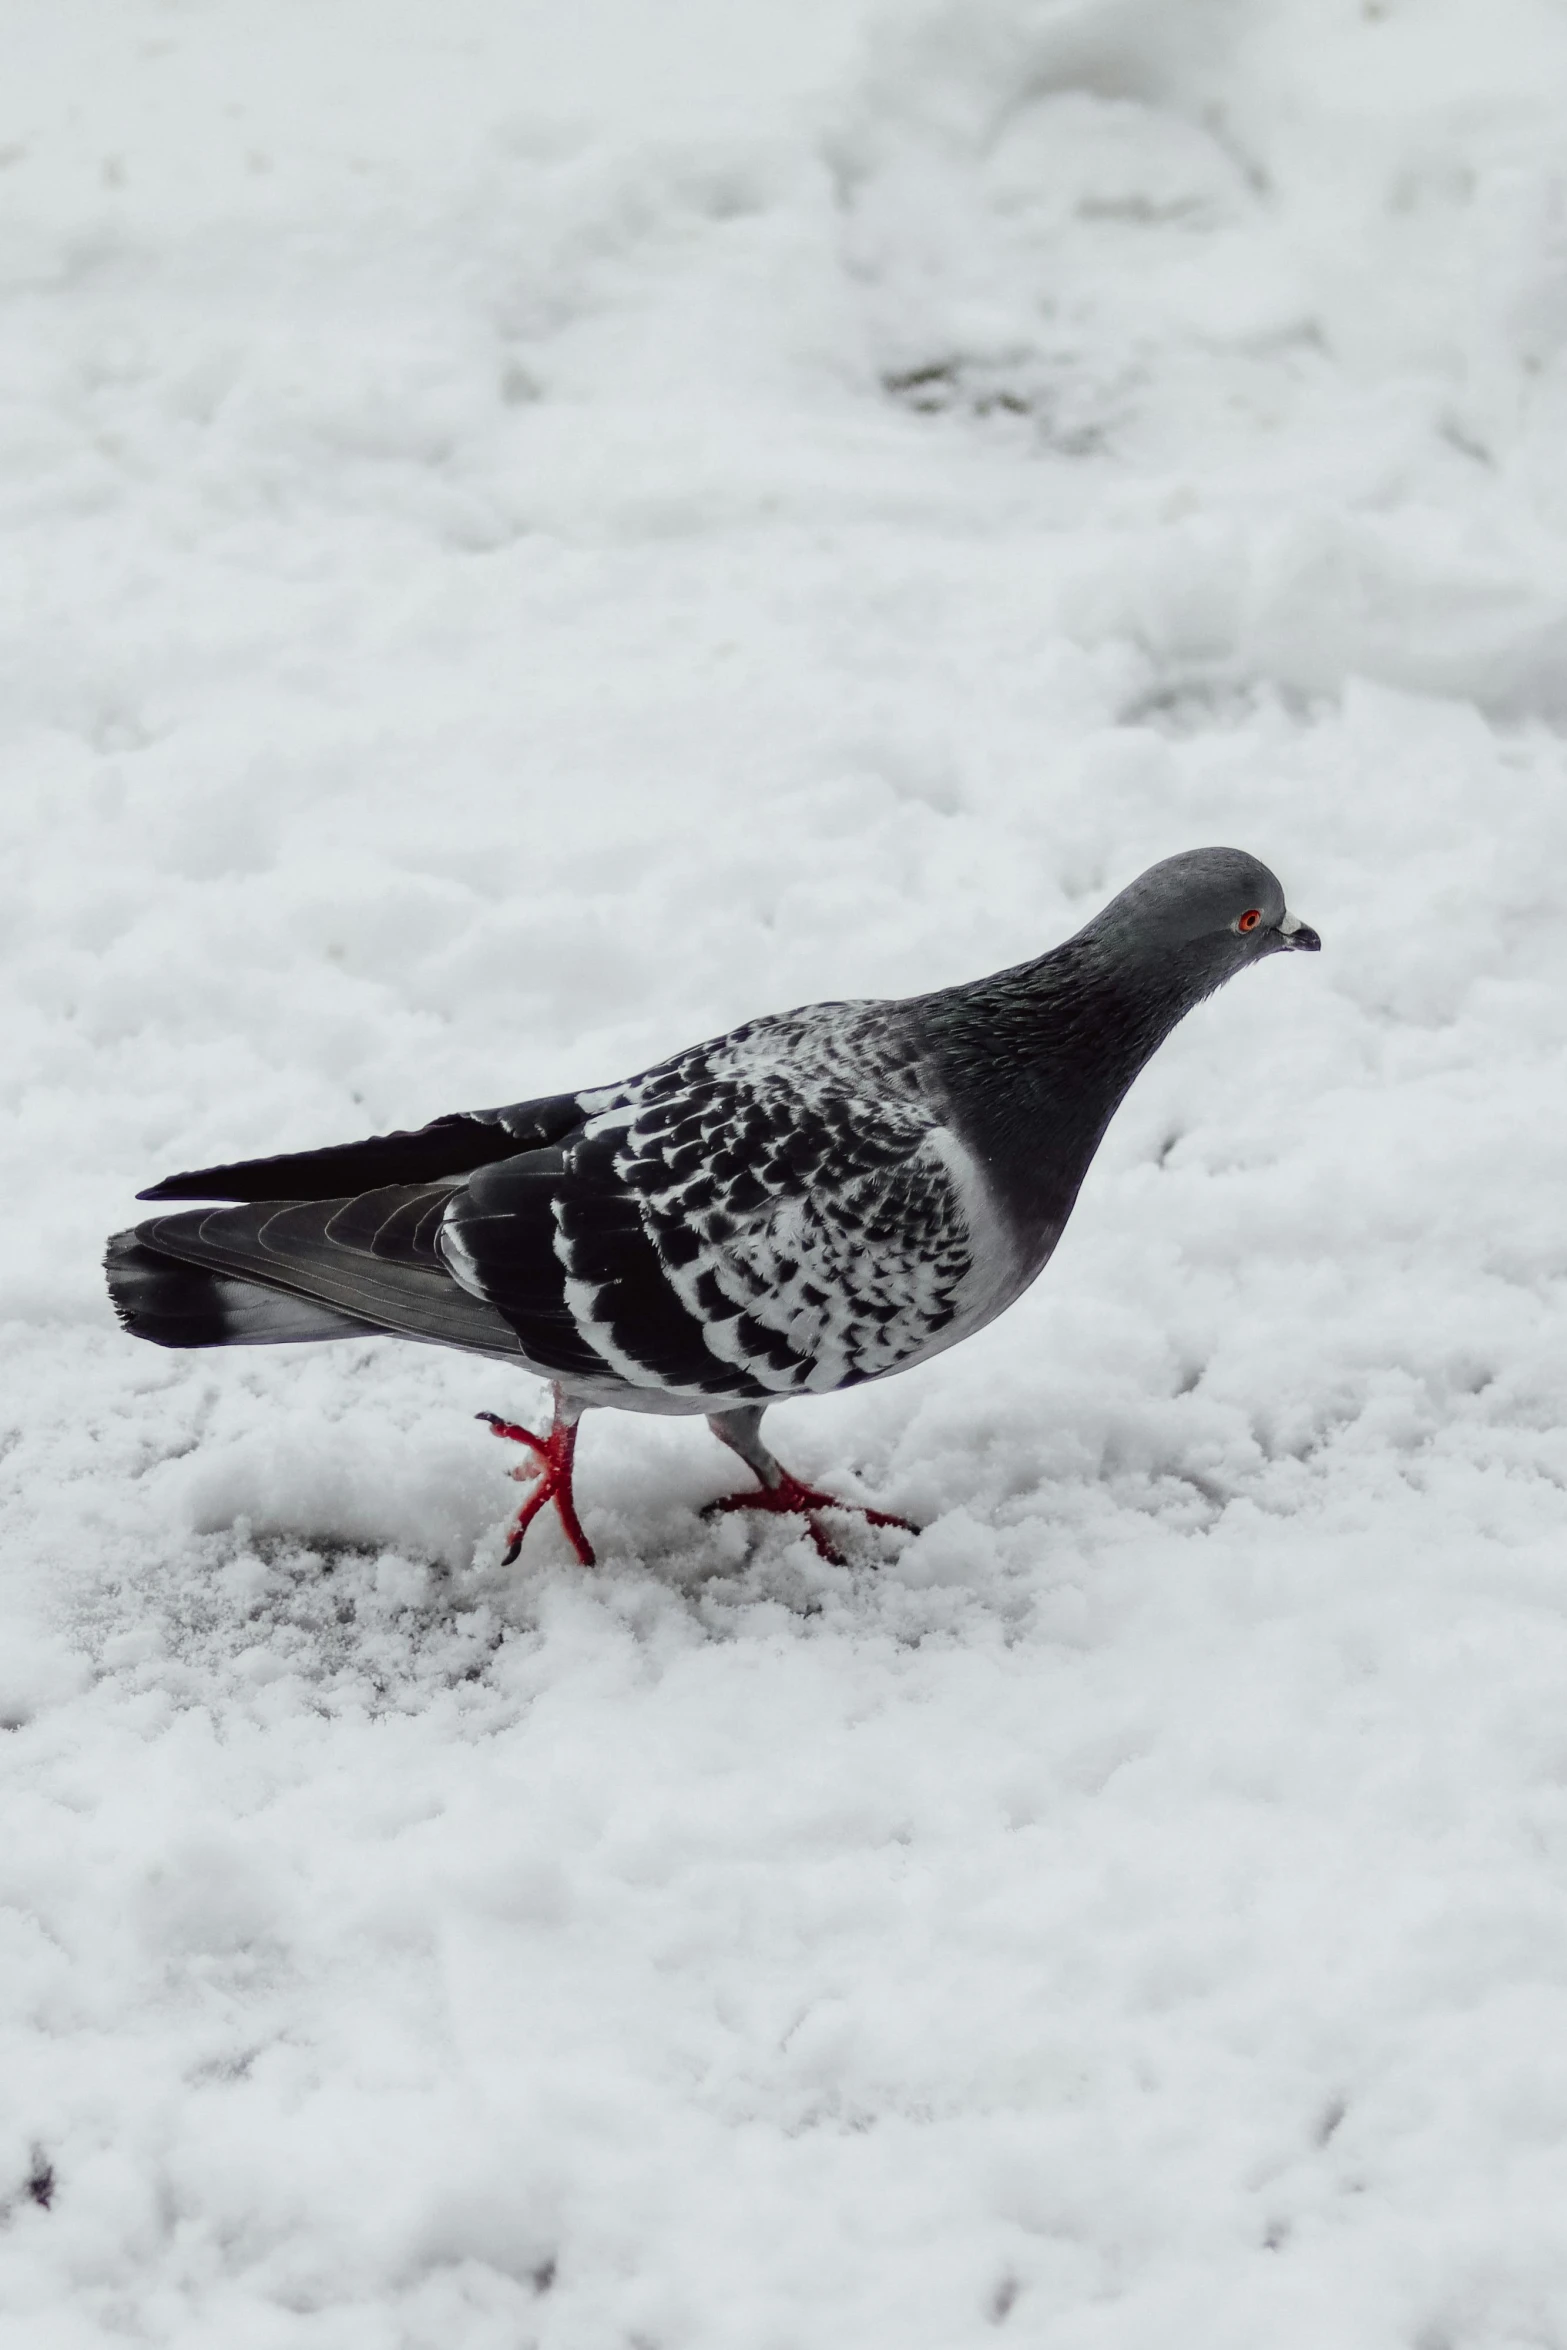 a pigeon that is standing in the snow, heavily ornamental, with a white nose, a high angle shot, heavily downvoted